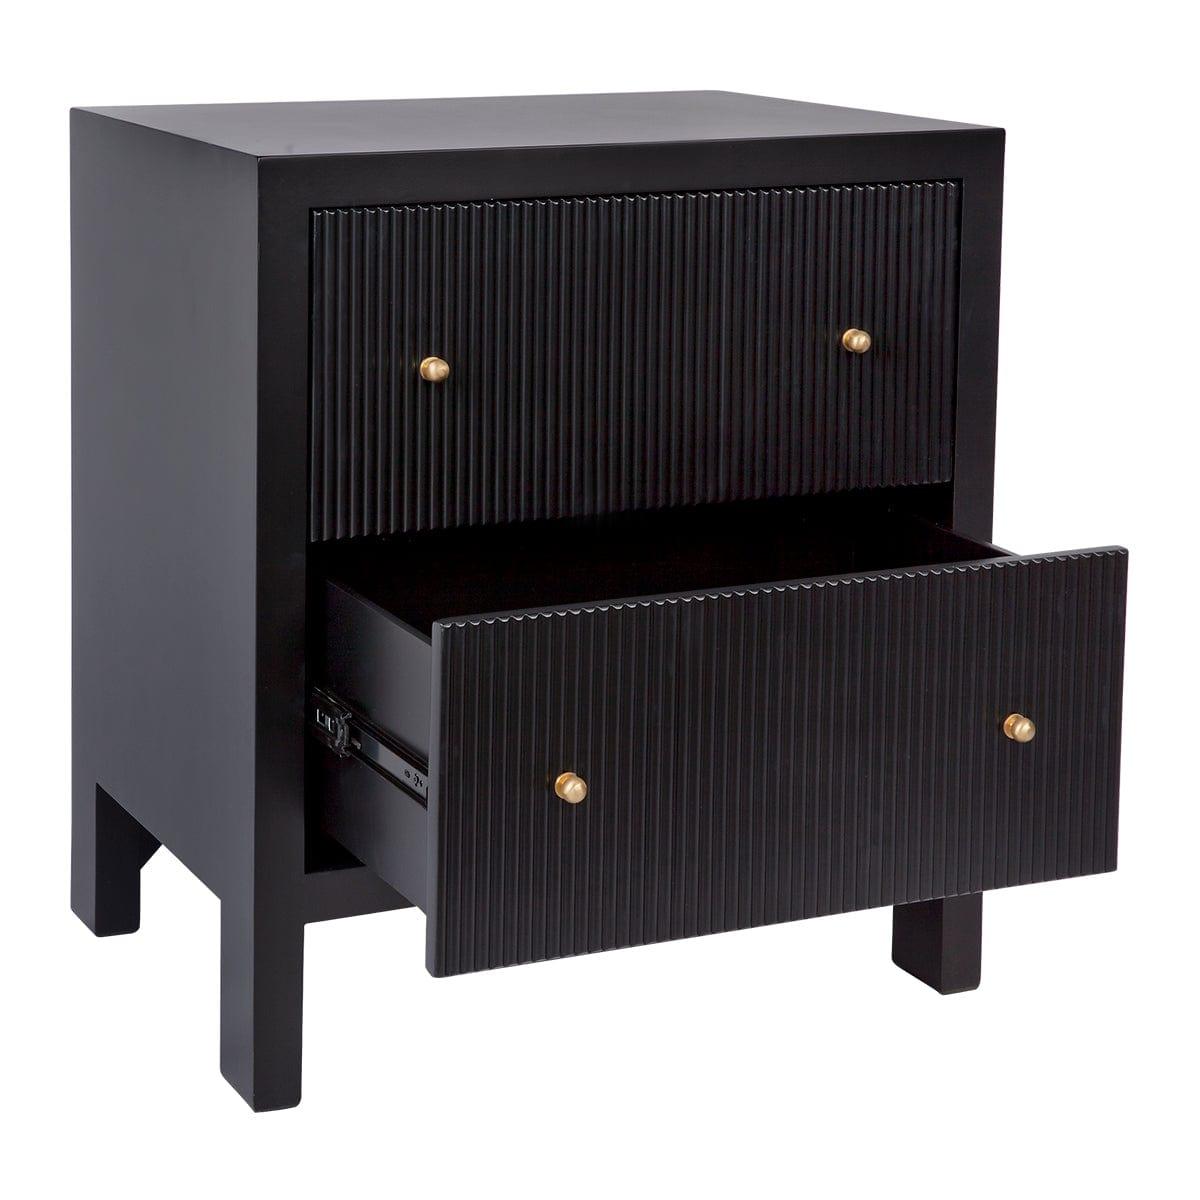 House Journey Ariana Bedside Table - Large Black